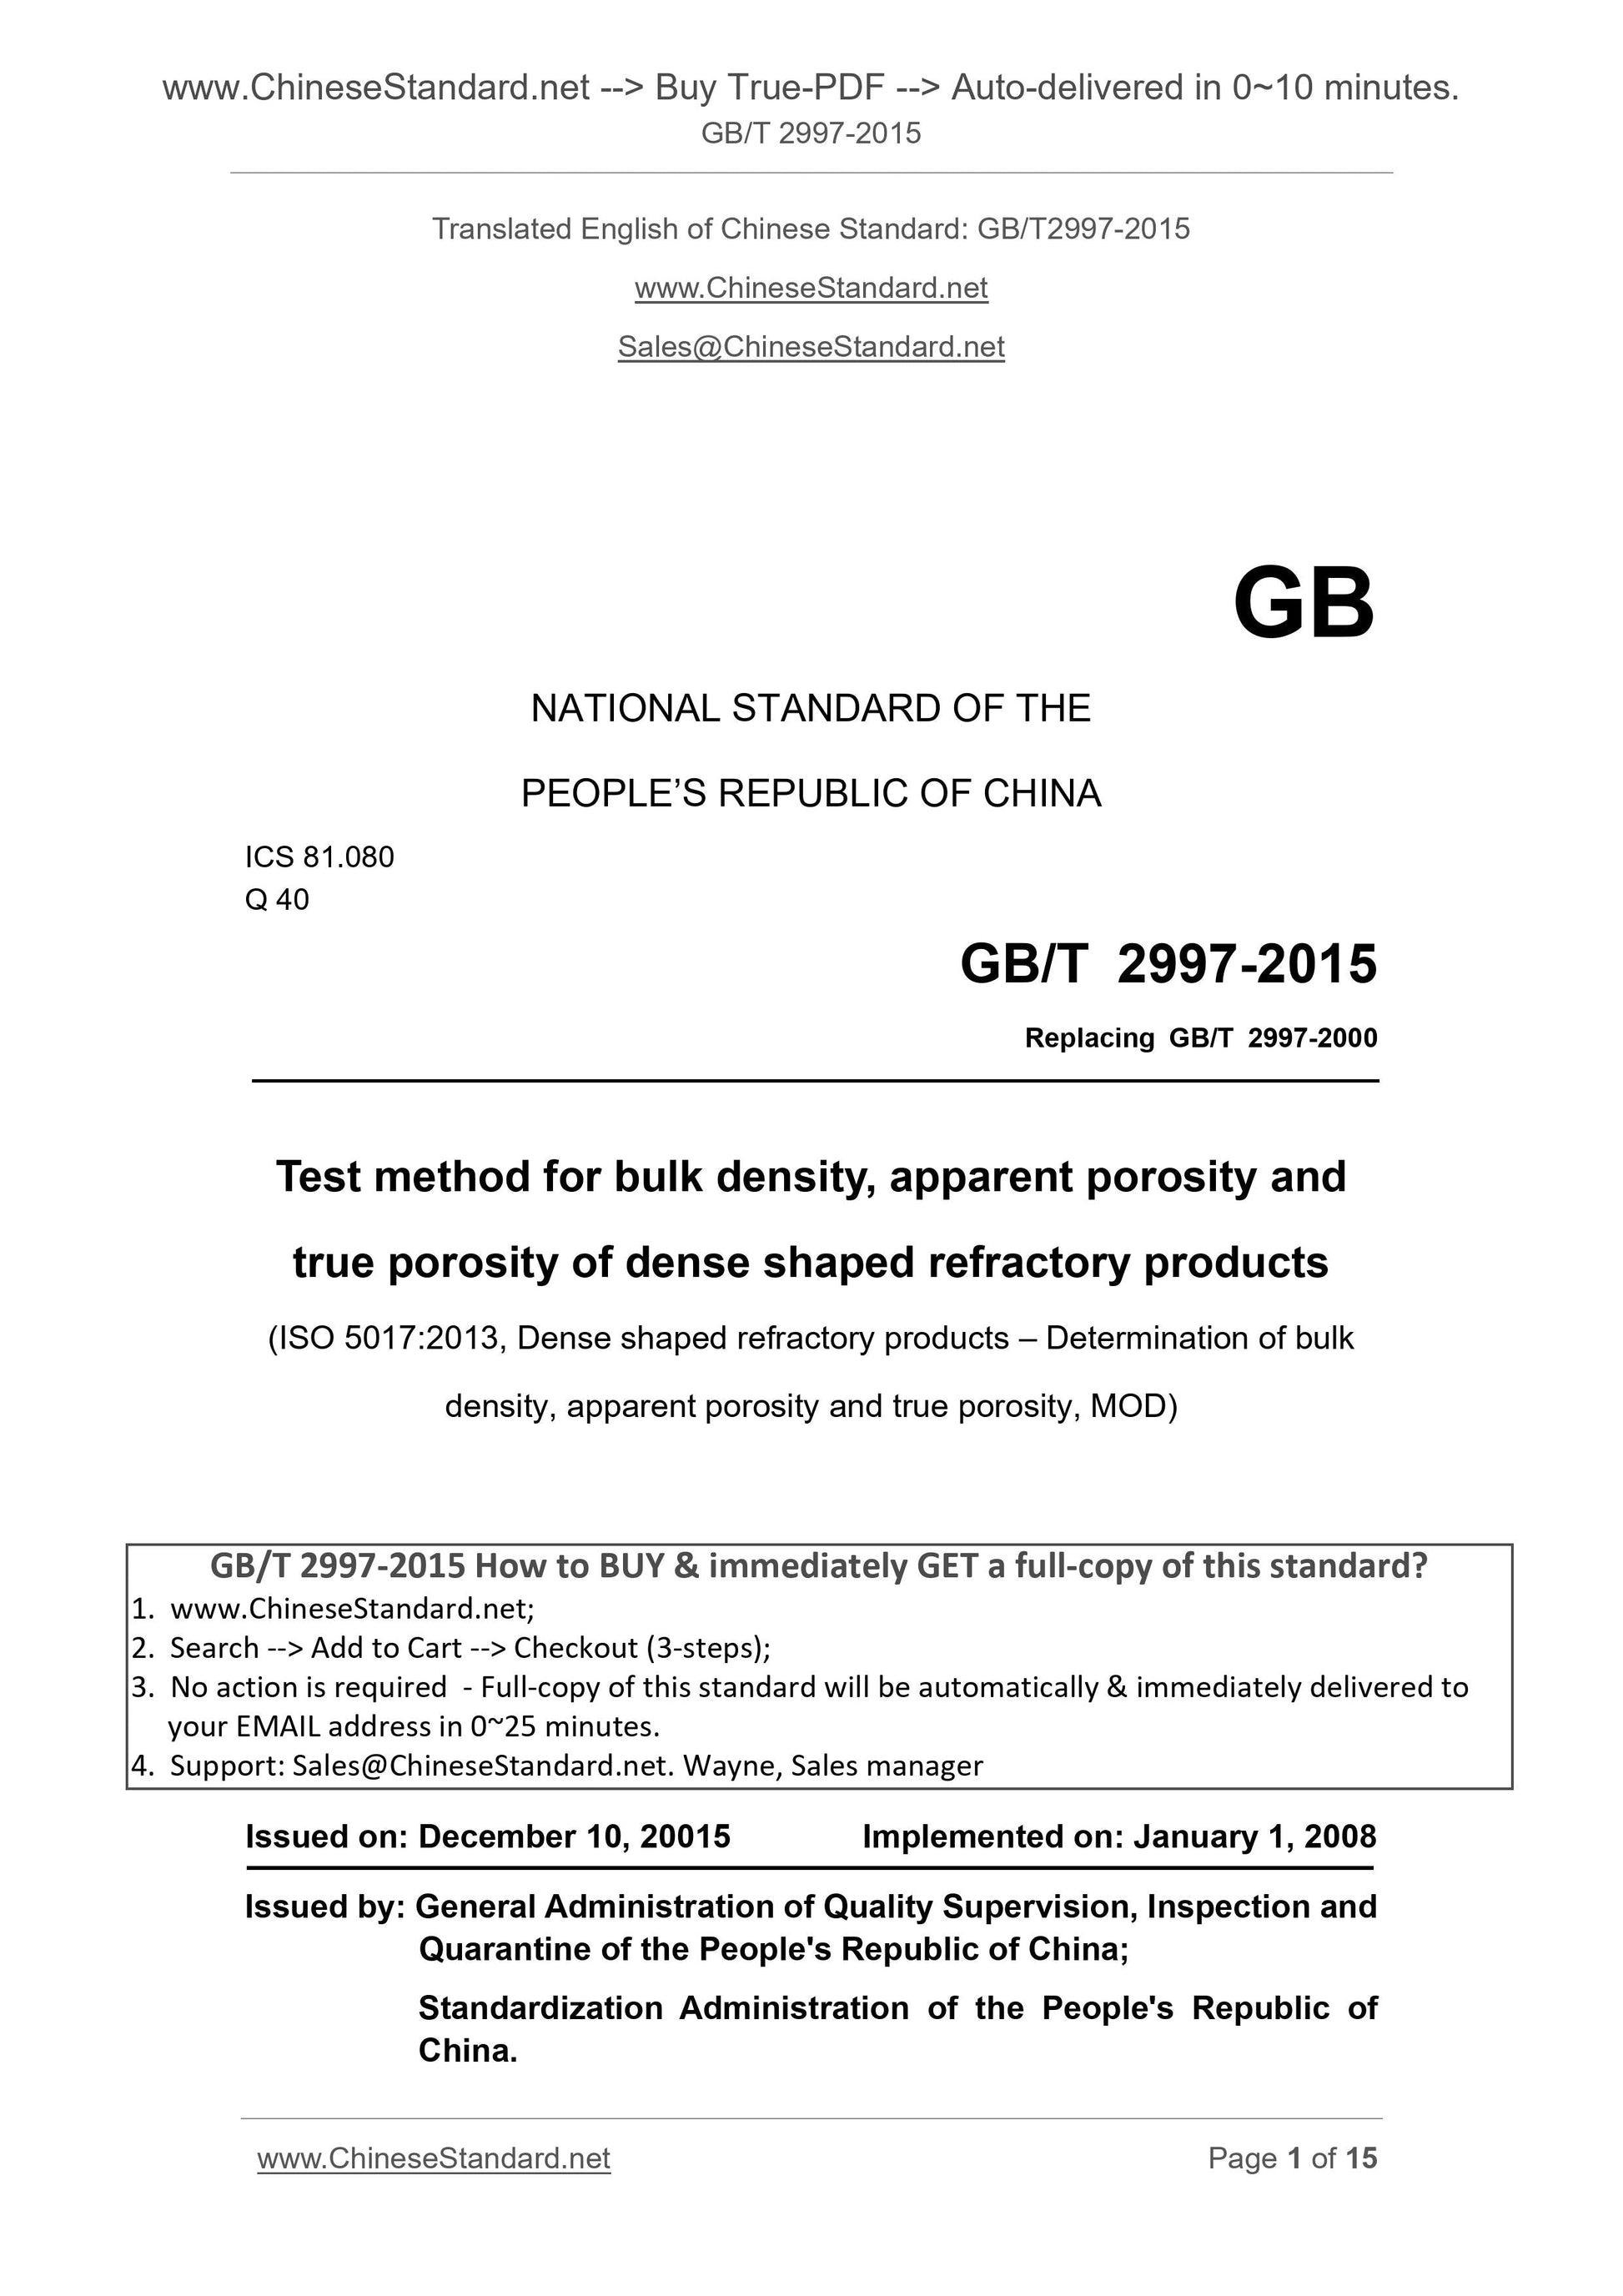 GB/T 2997-2015 Page 1